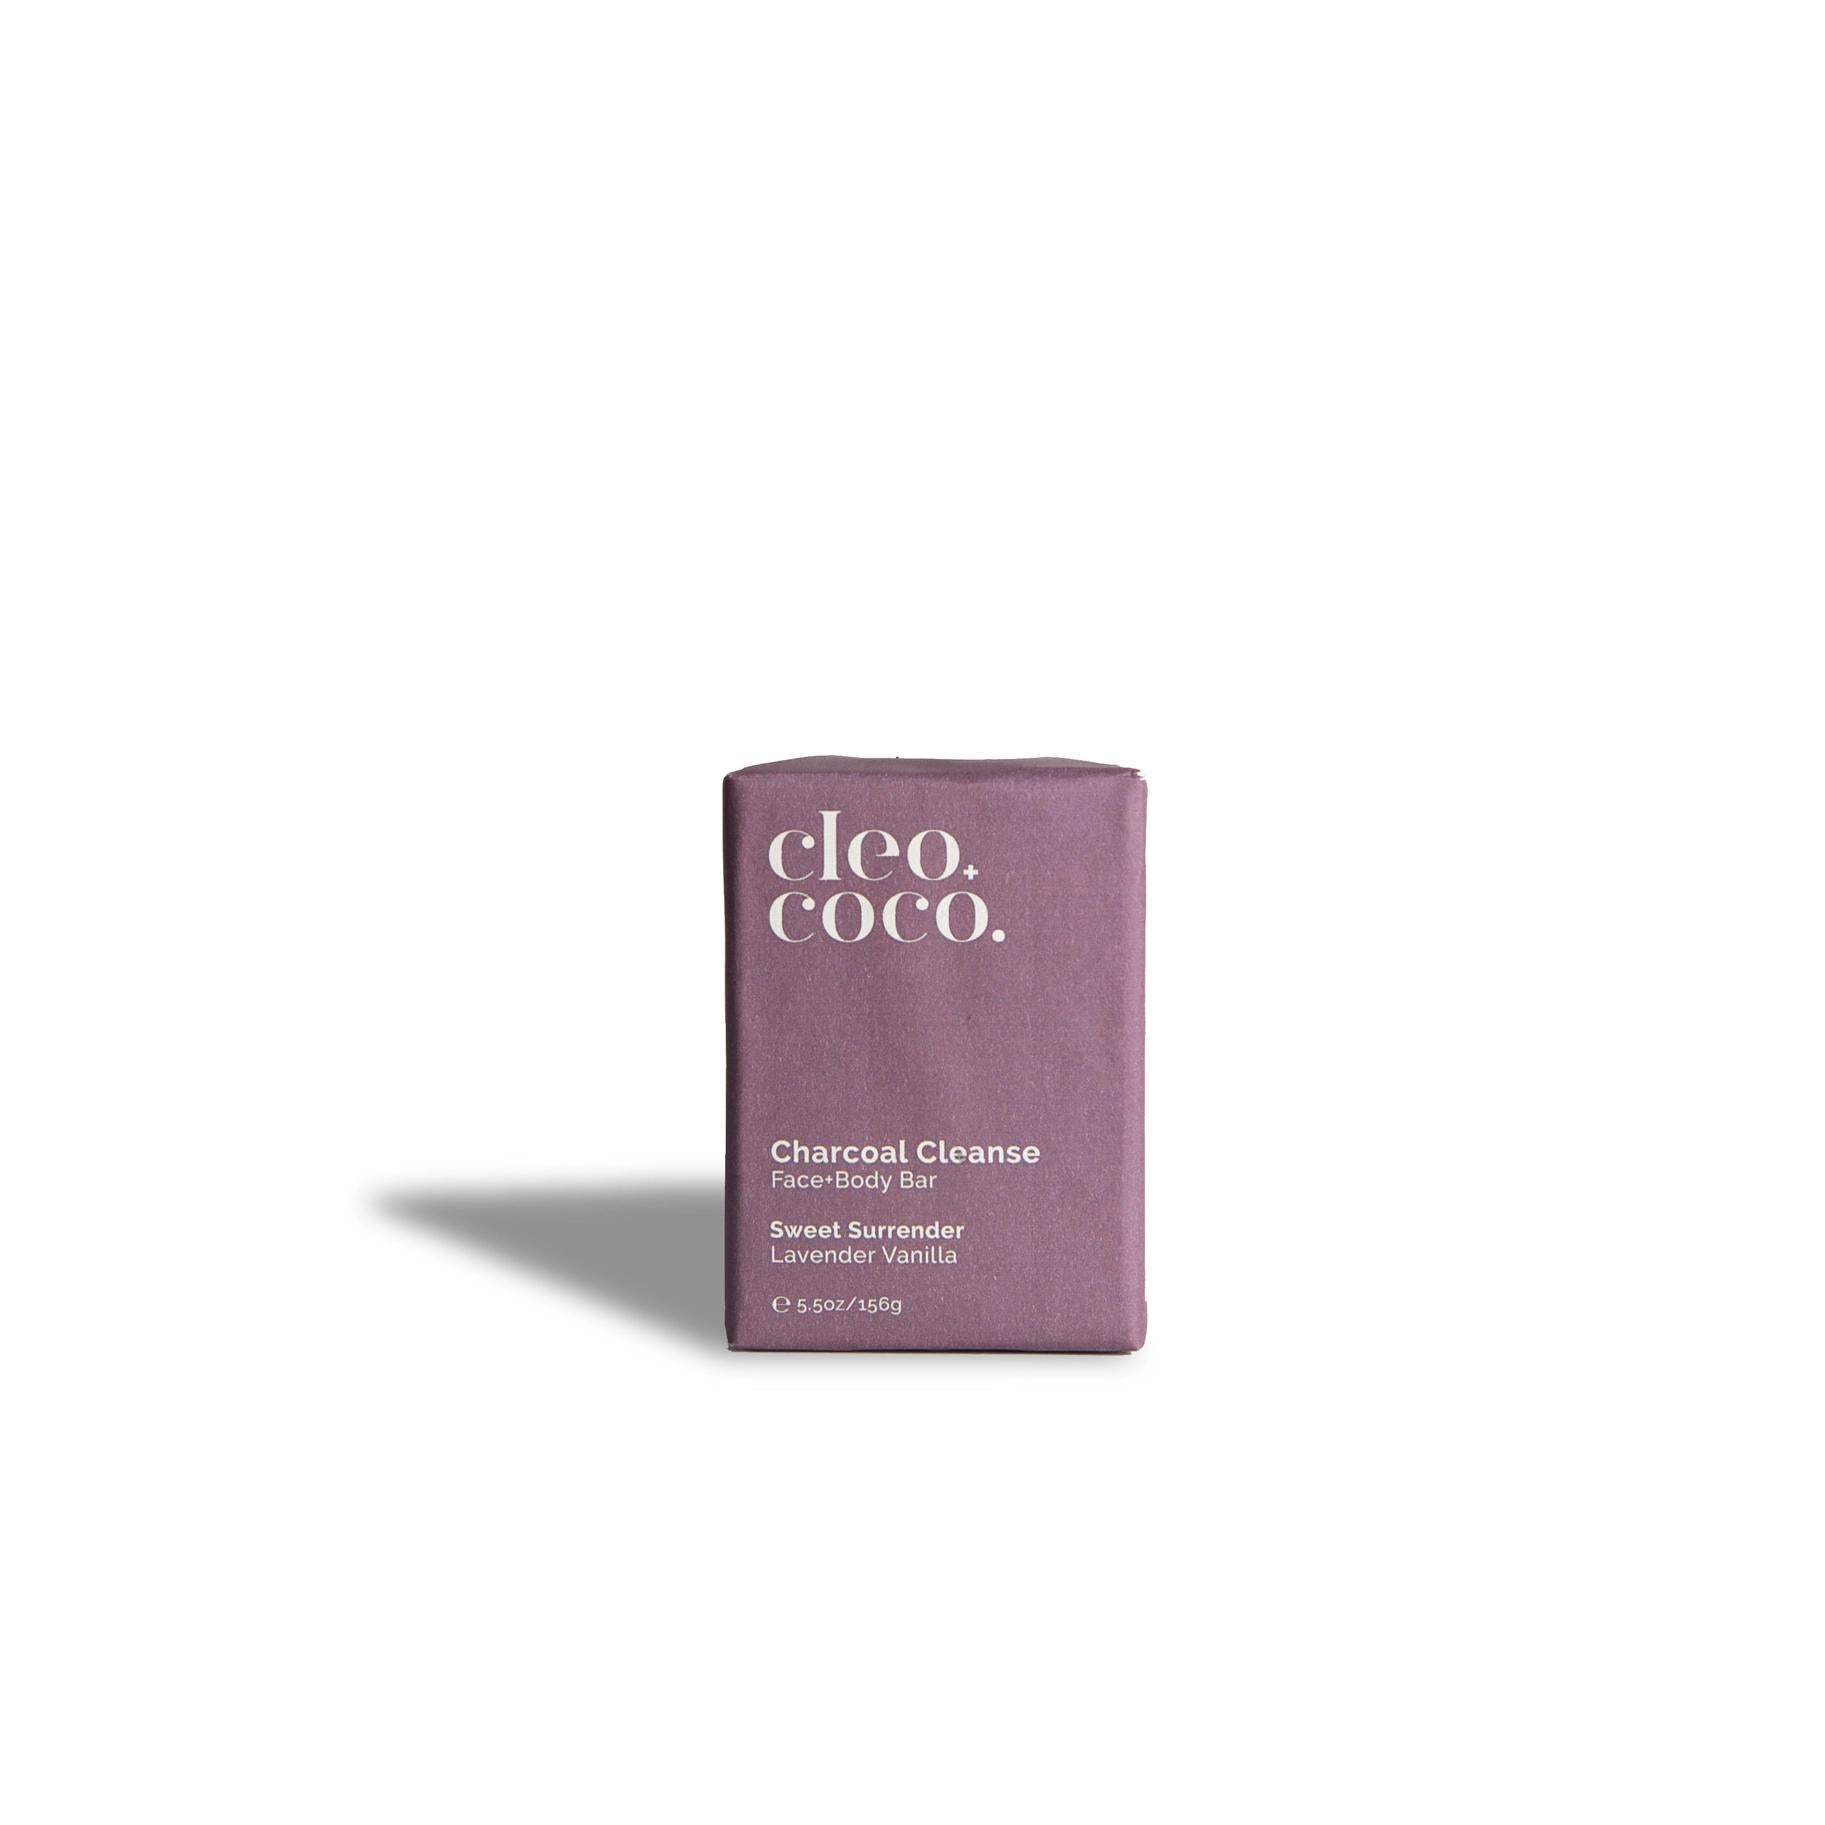 Charcoal Cleanse Face and Body Bar l Lavender Vanilla — 5.5oz